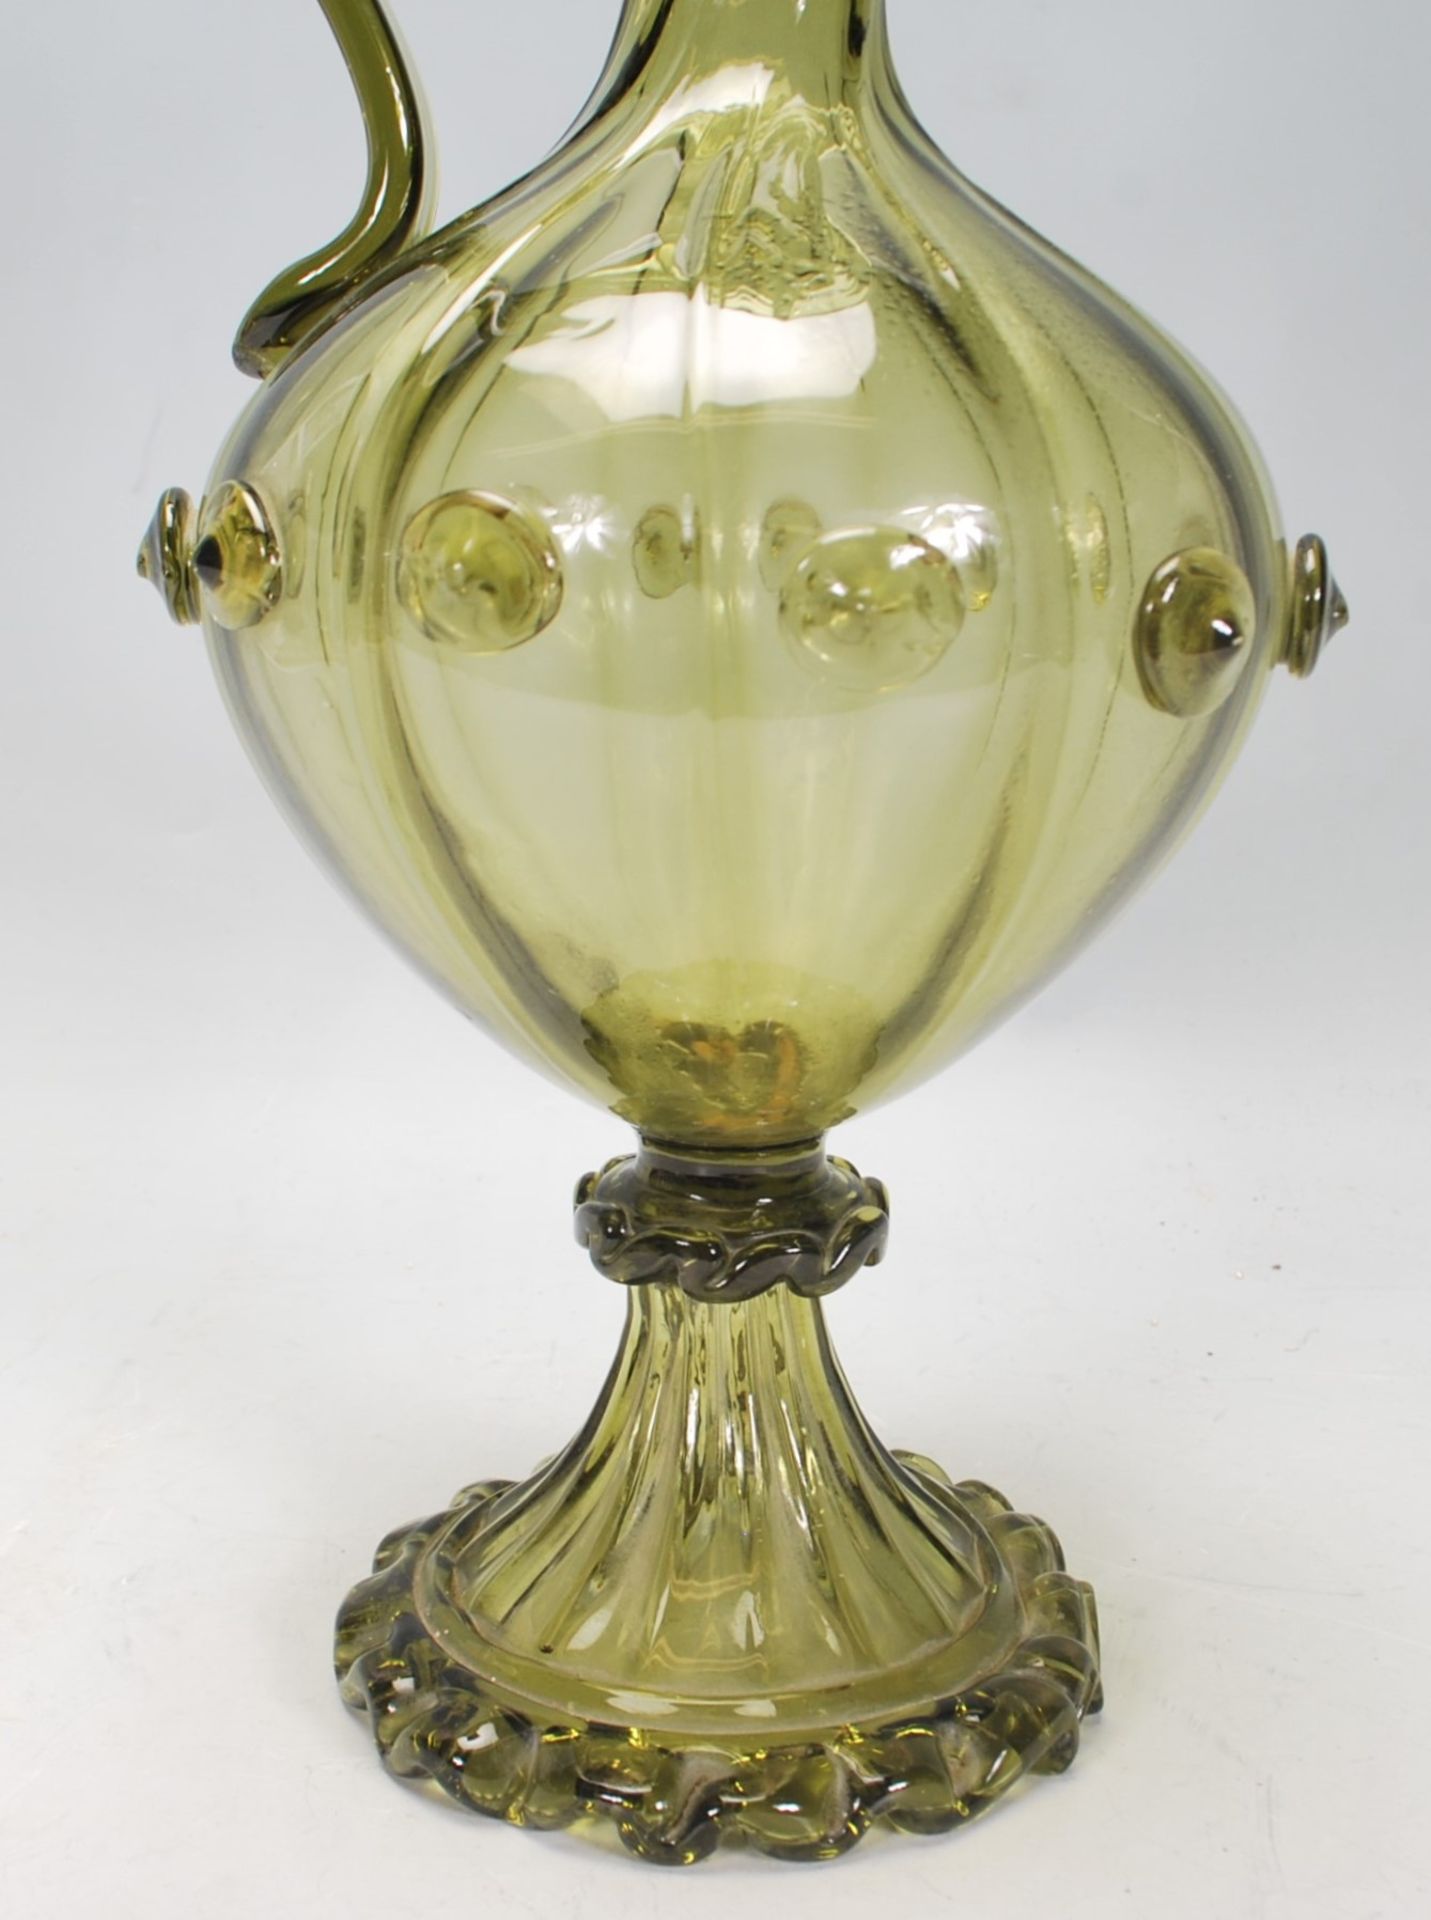 A 20th Century Murano green glass ewer jug having a reeded bulbous form body with a twisted neck, - Image 3 of 6